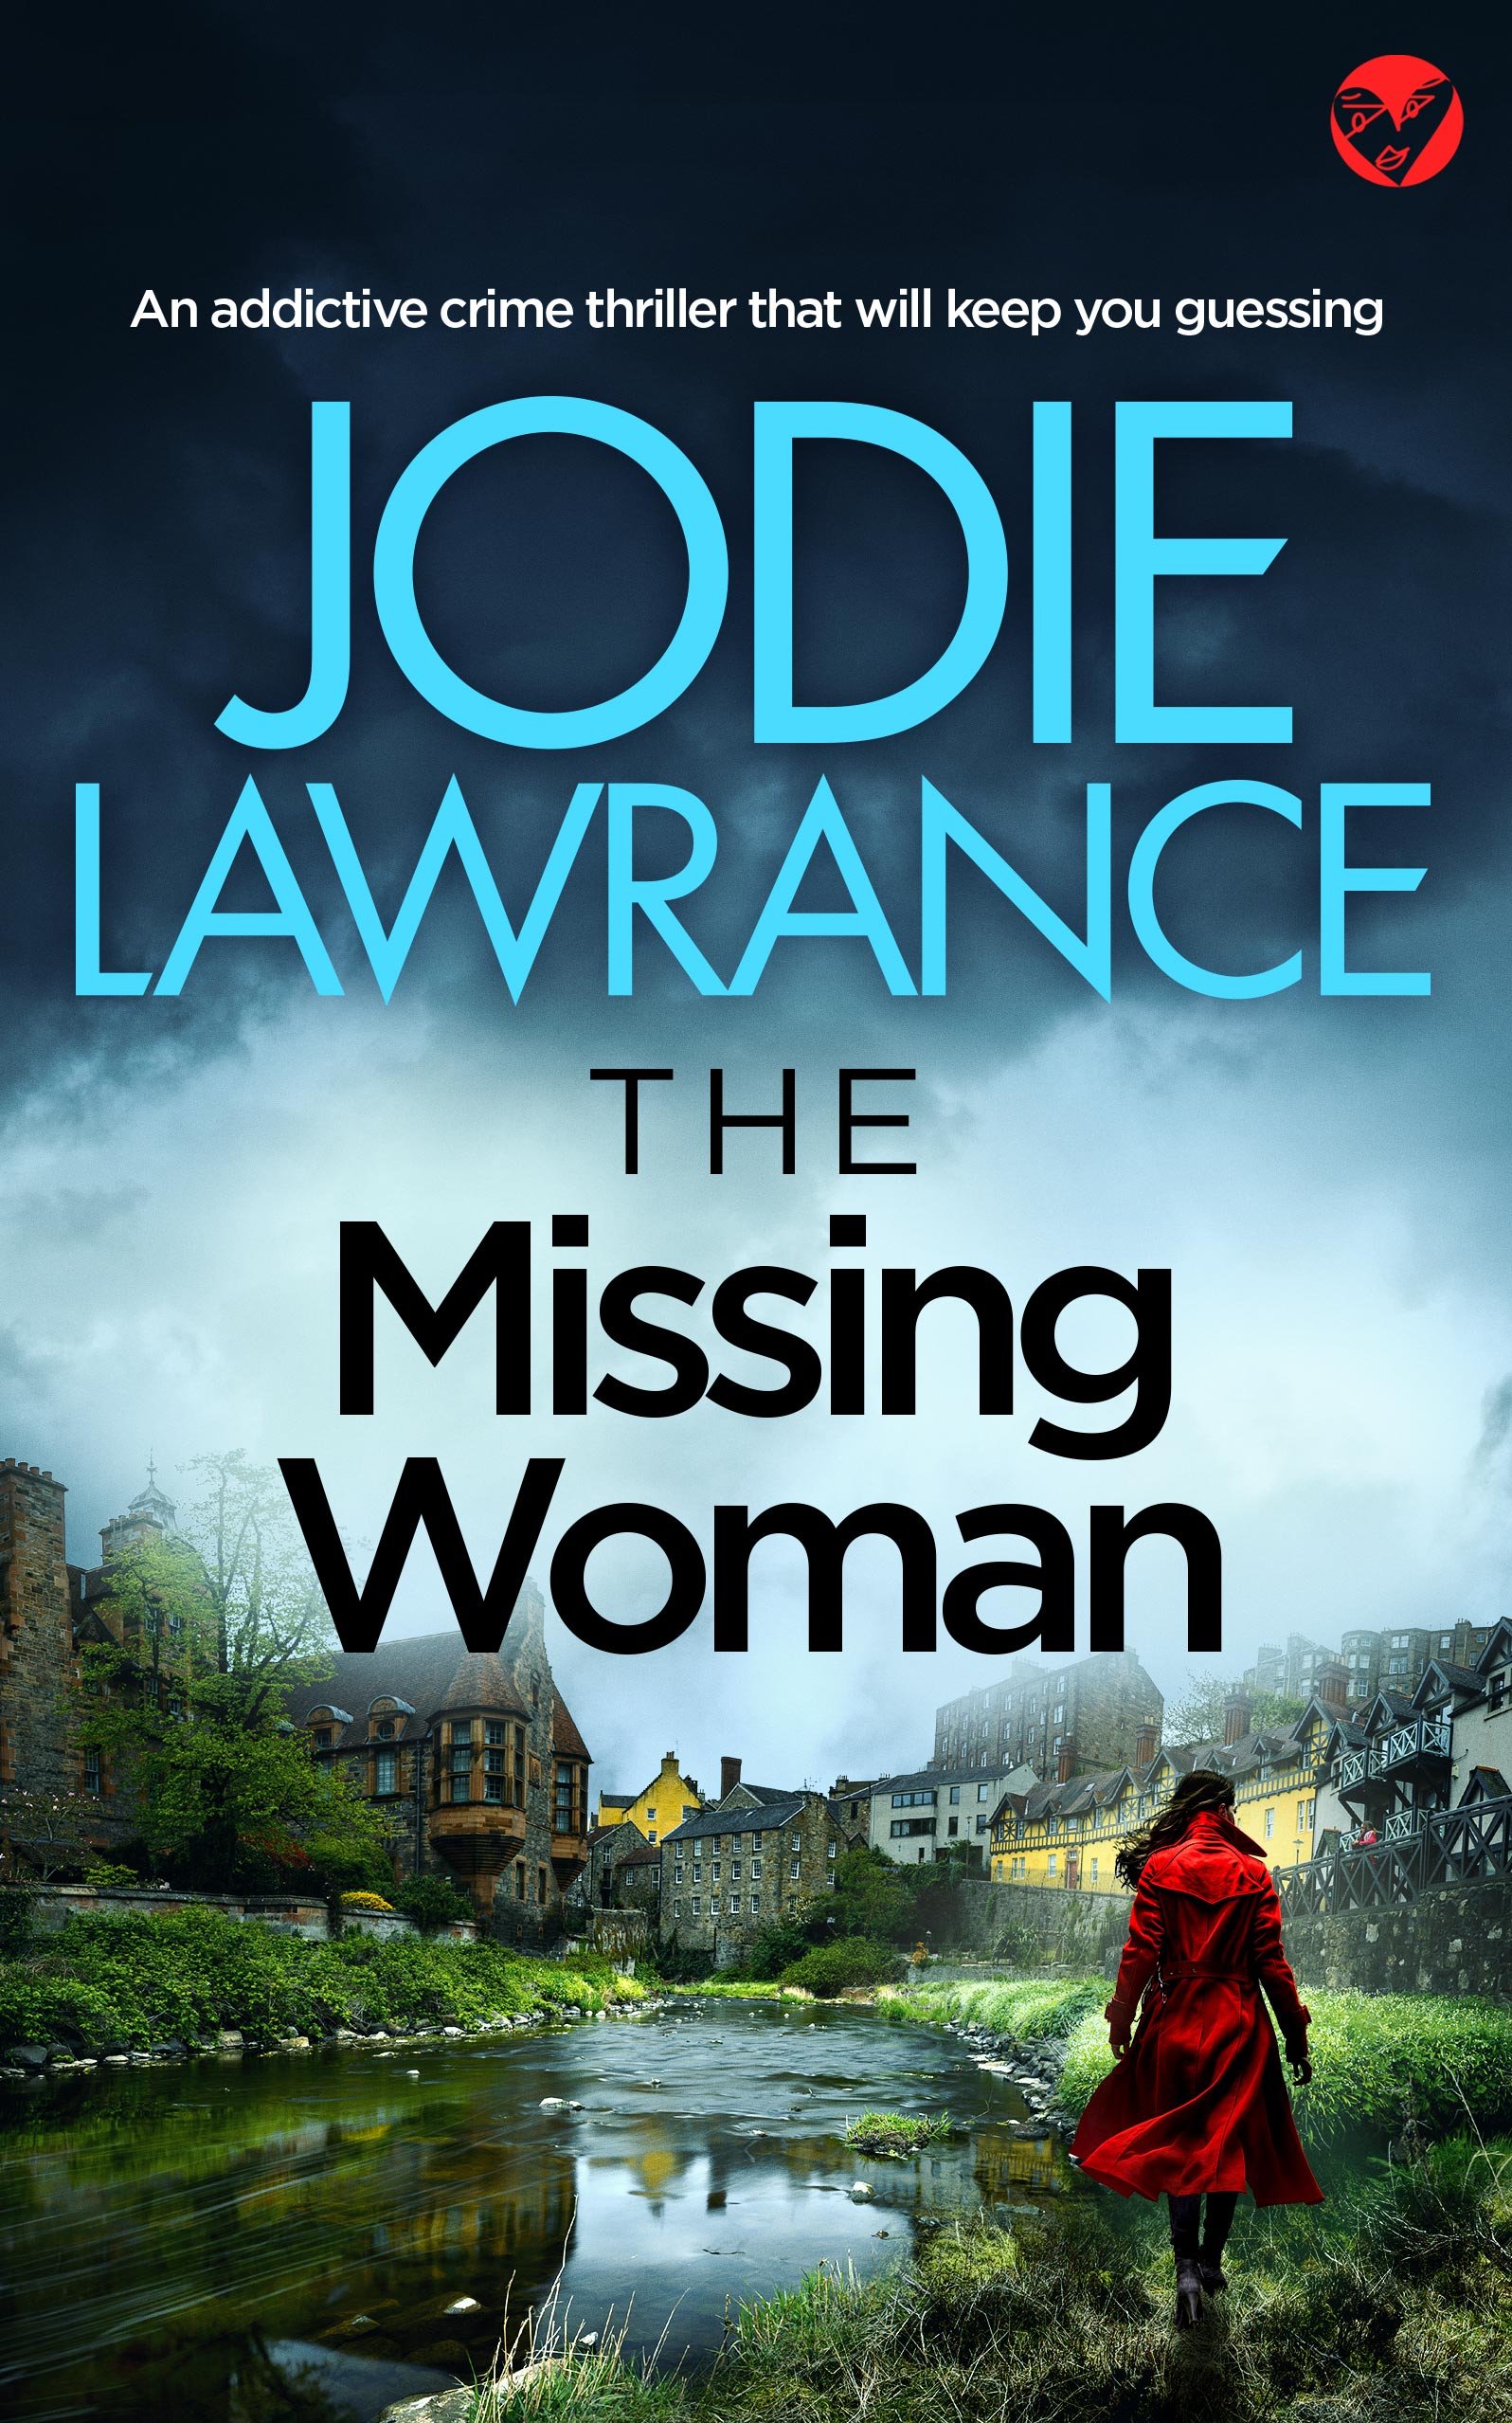 THE MISSING WOMAN Cover publish 643KB.jpg